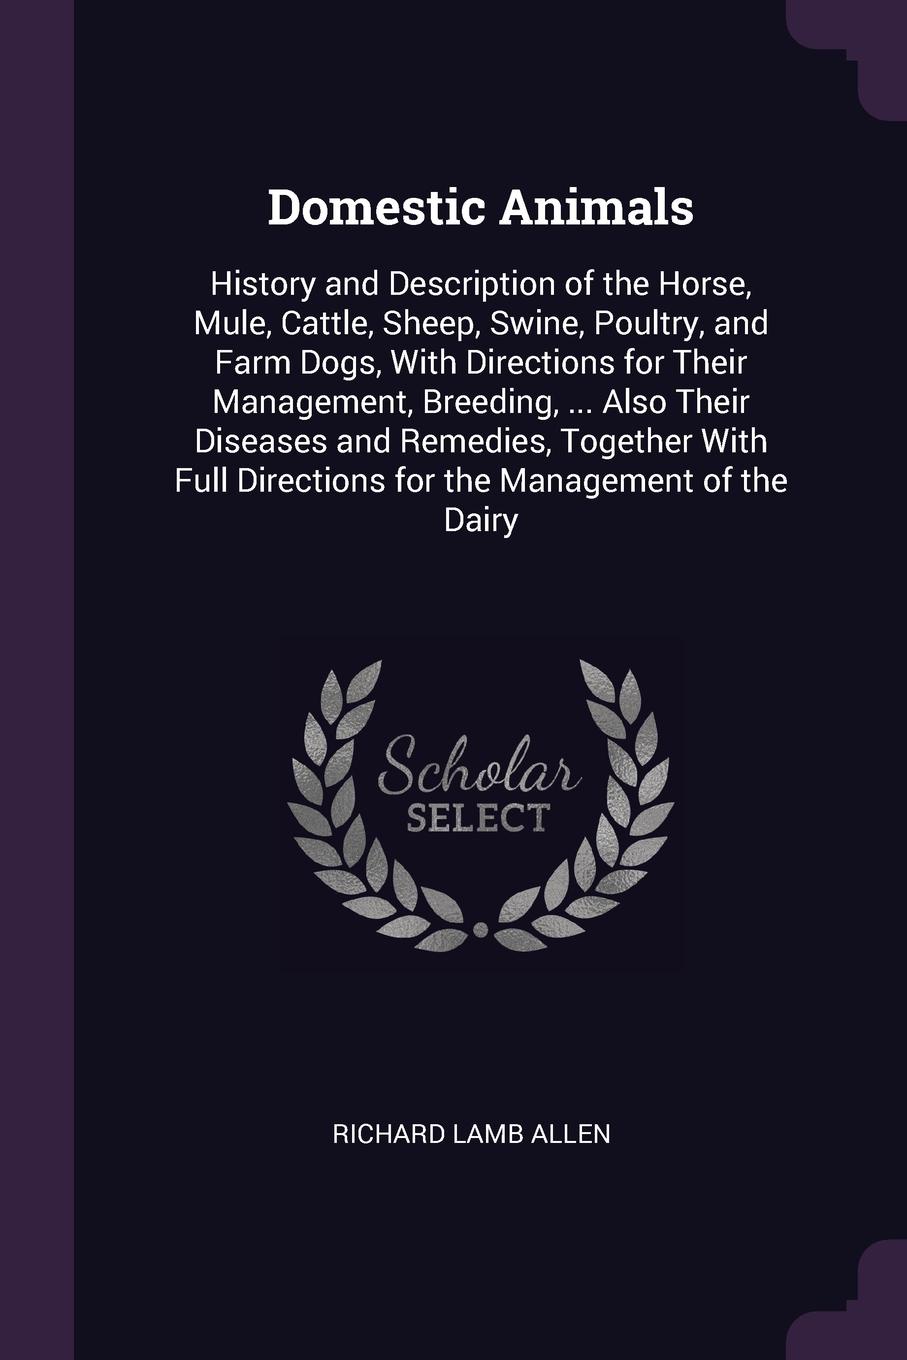 Domestic Animals. History and Description of the Horse, Mule, Cattle, Sheep, Swine, Poultry, and Farm Dogs, With Directions for Their Management, Breeding, ... Also Their Diseases and Remedies, Together With Full Directions for the Management of t...